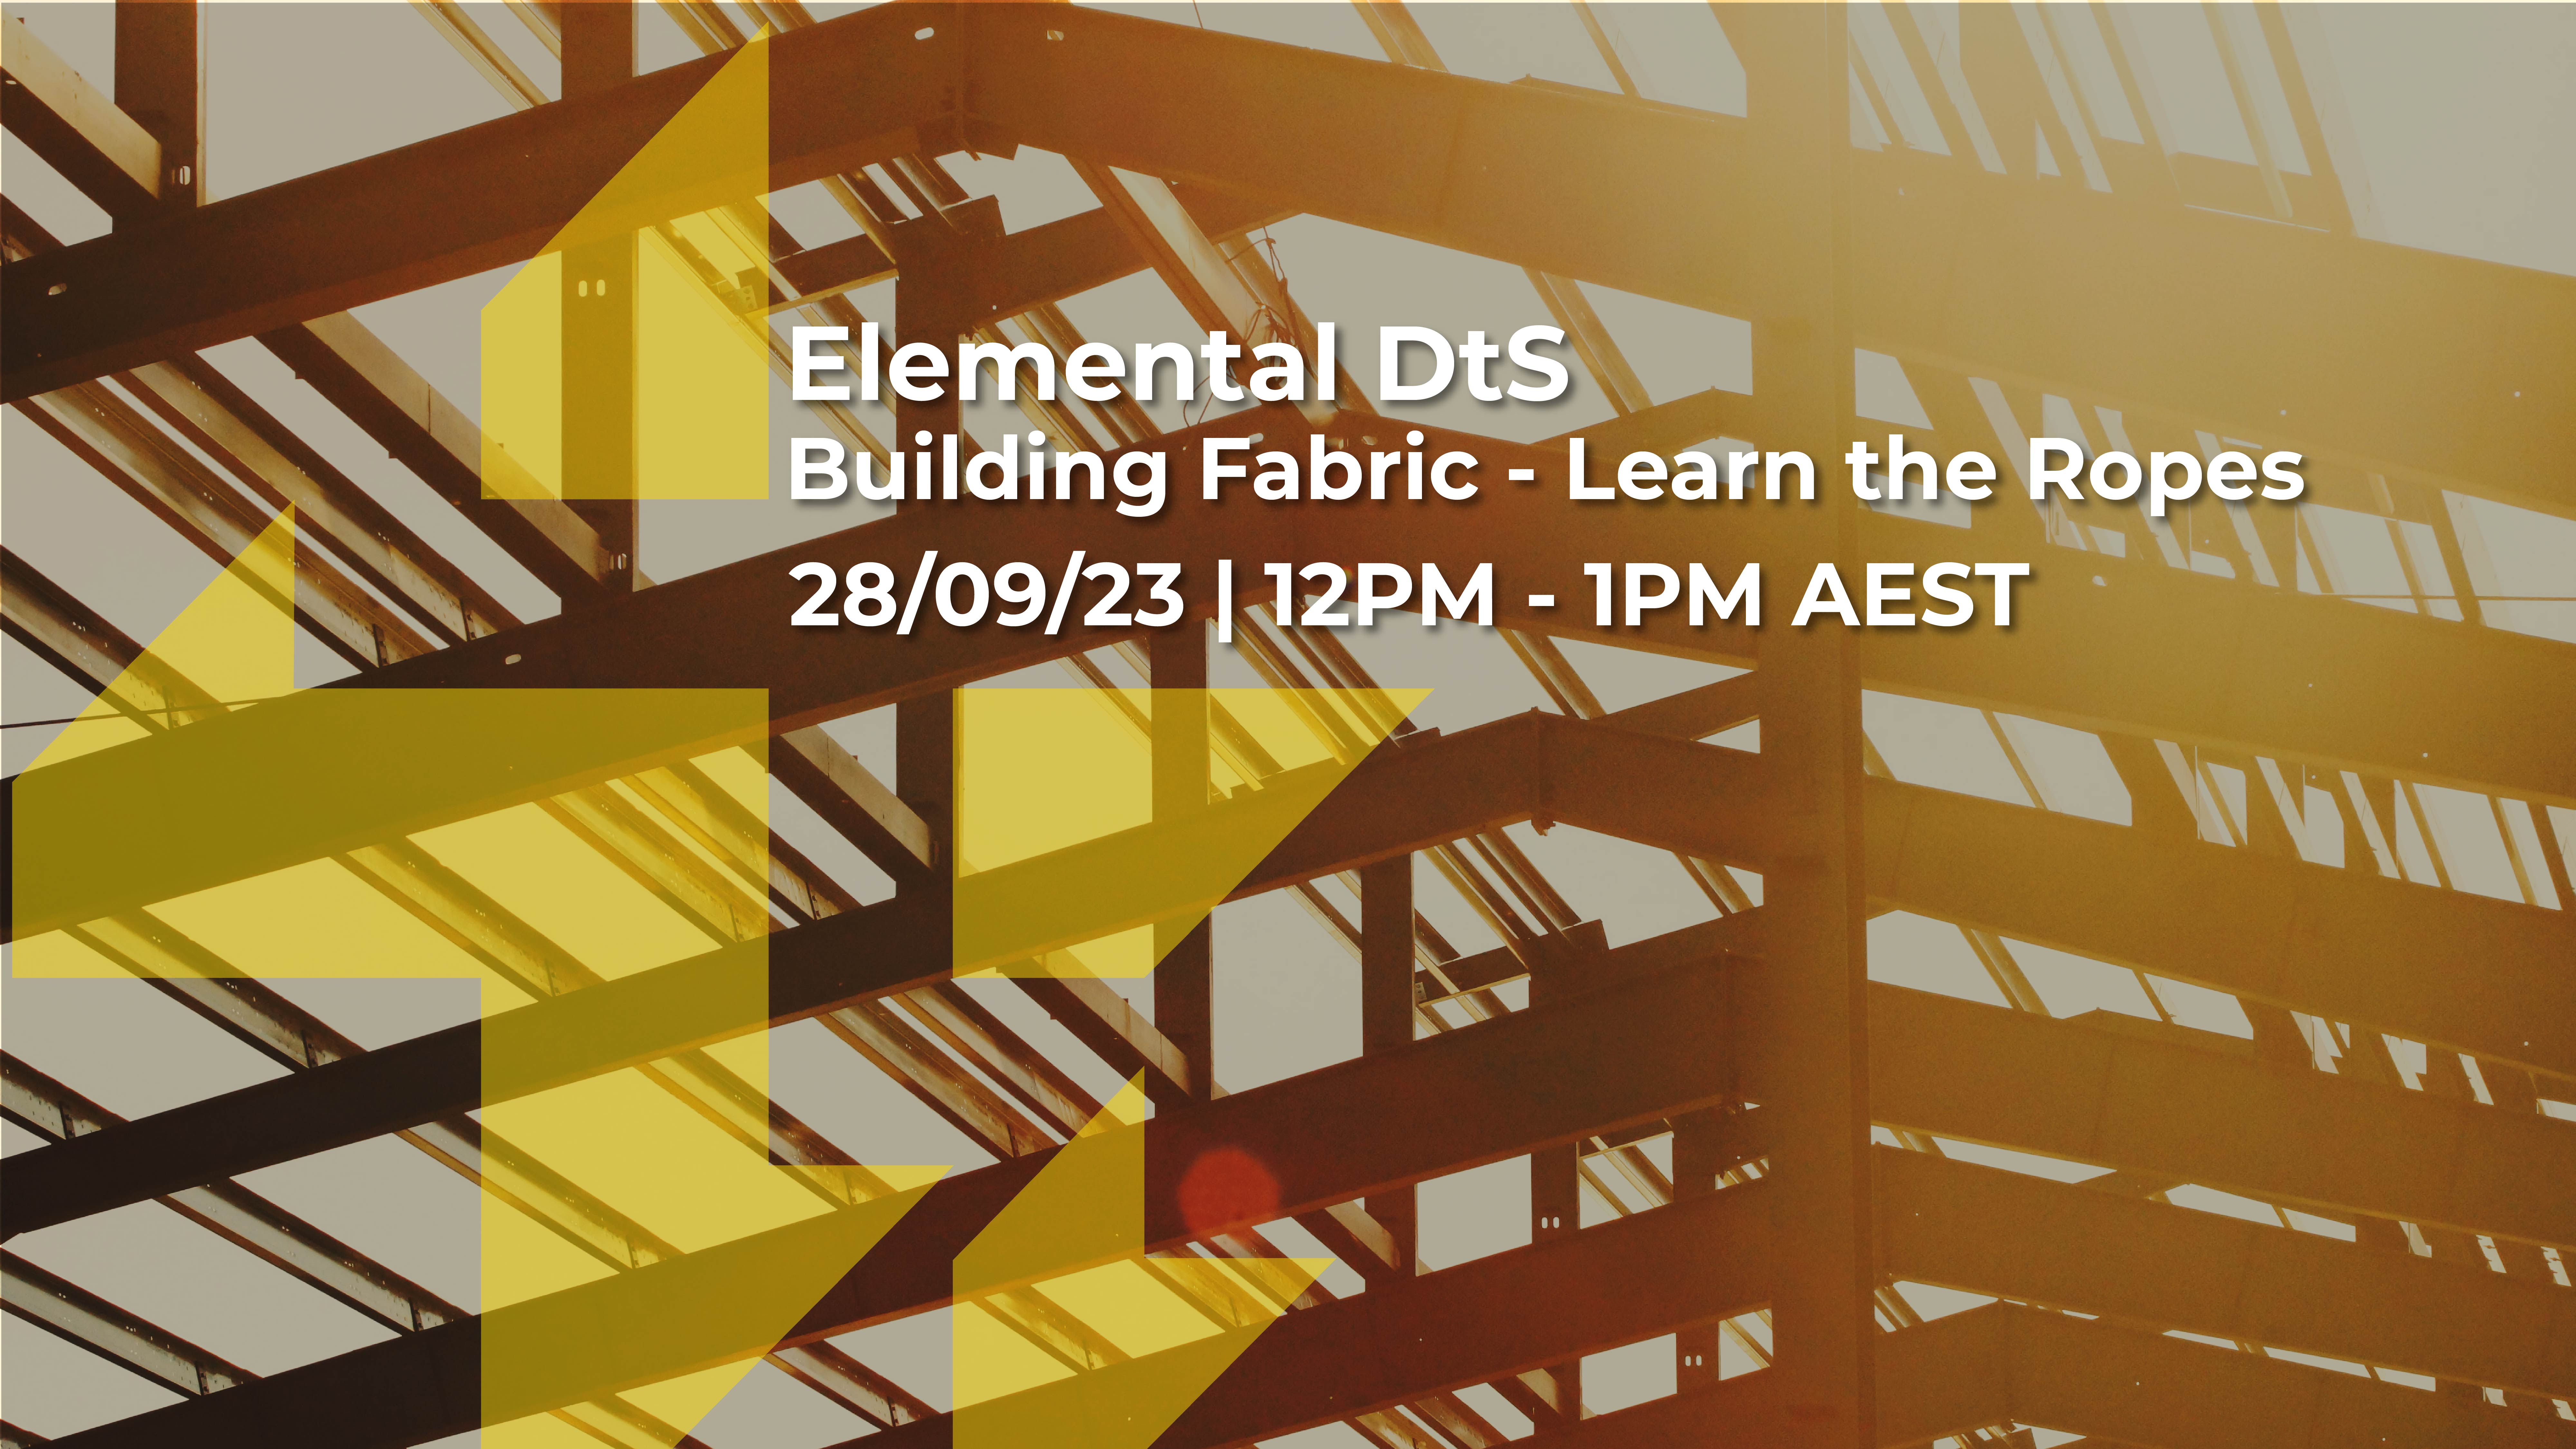 Elemental DtS for Building Fabric - Learn the Ropes